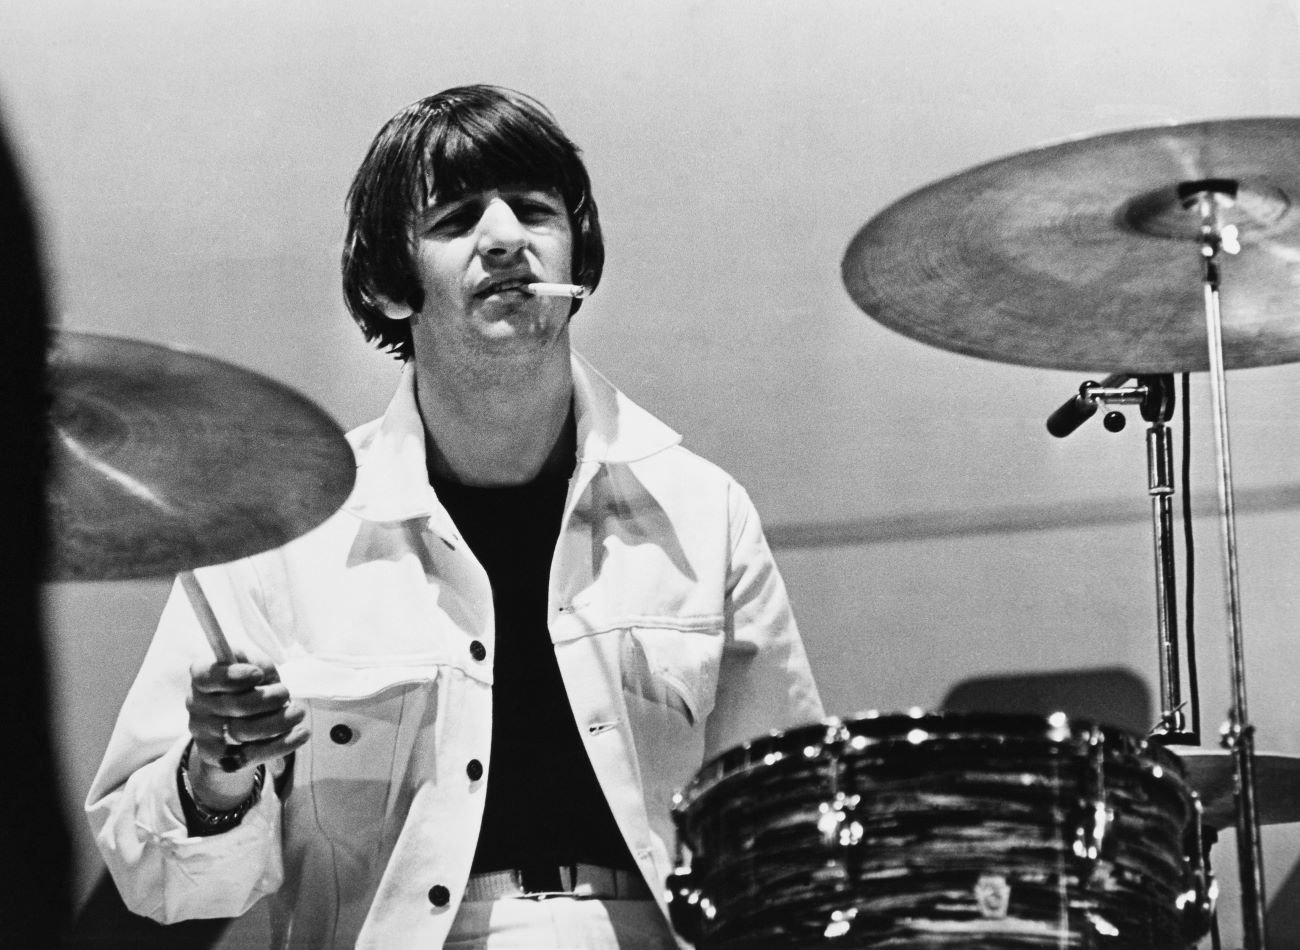 A black and white picture of Ringo Starr of The Beatles drumming and holding a cigarette in his mouth.